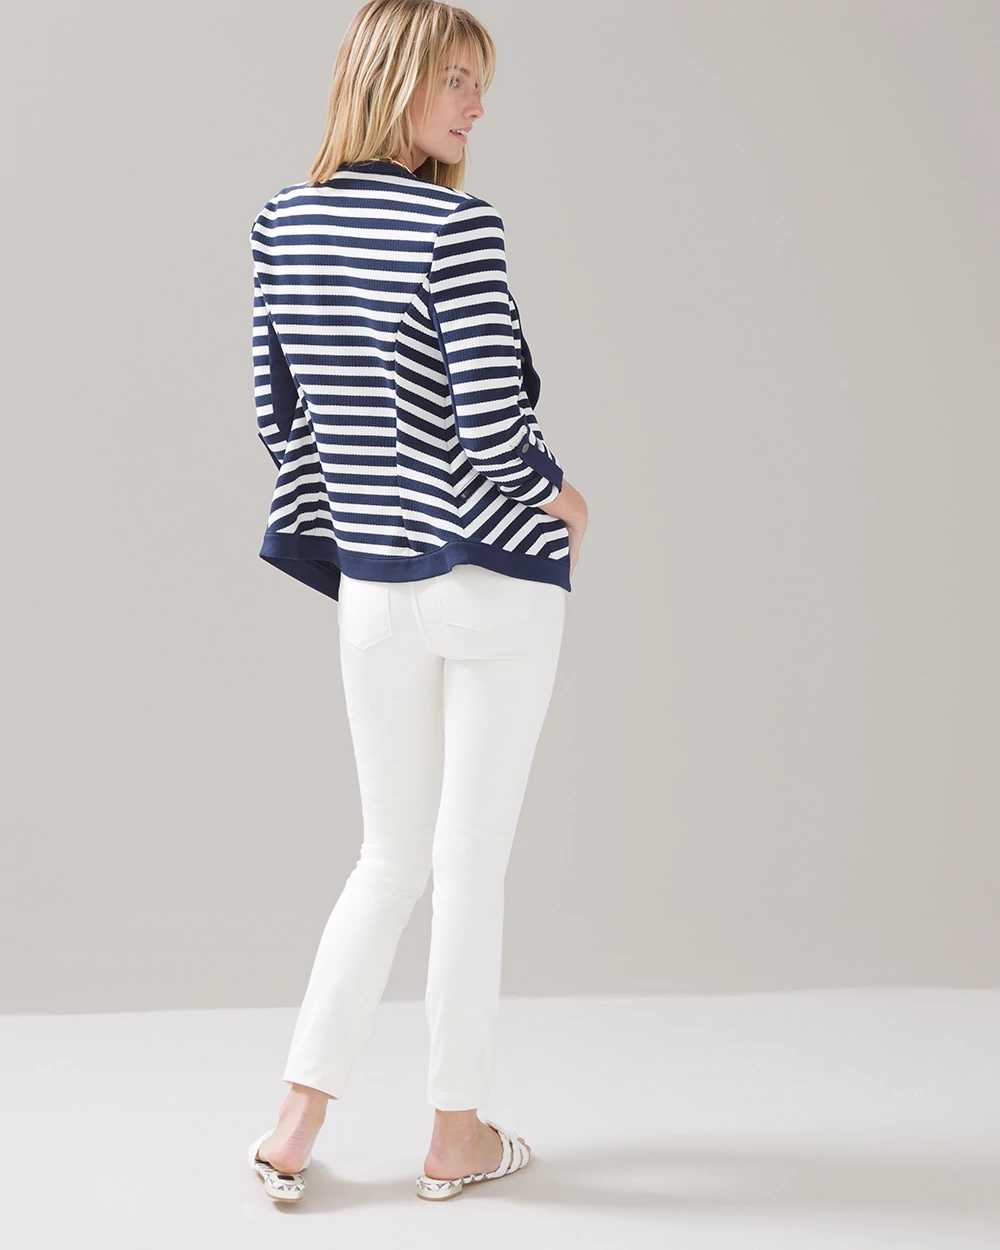 Petite Sculpt High-Rise Skinny Ankle No-Show White Jeans click to view larger image.